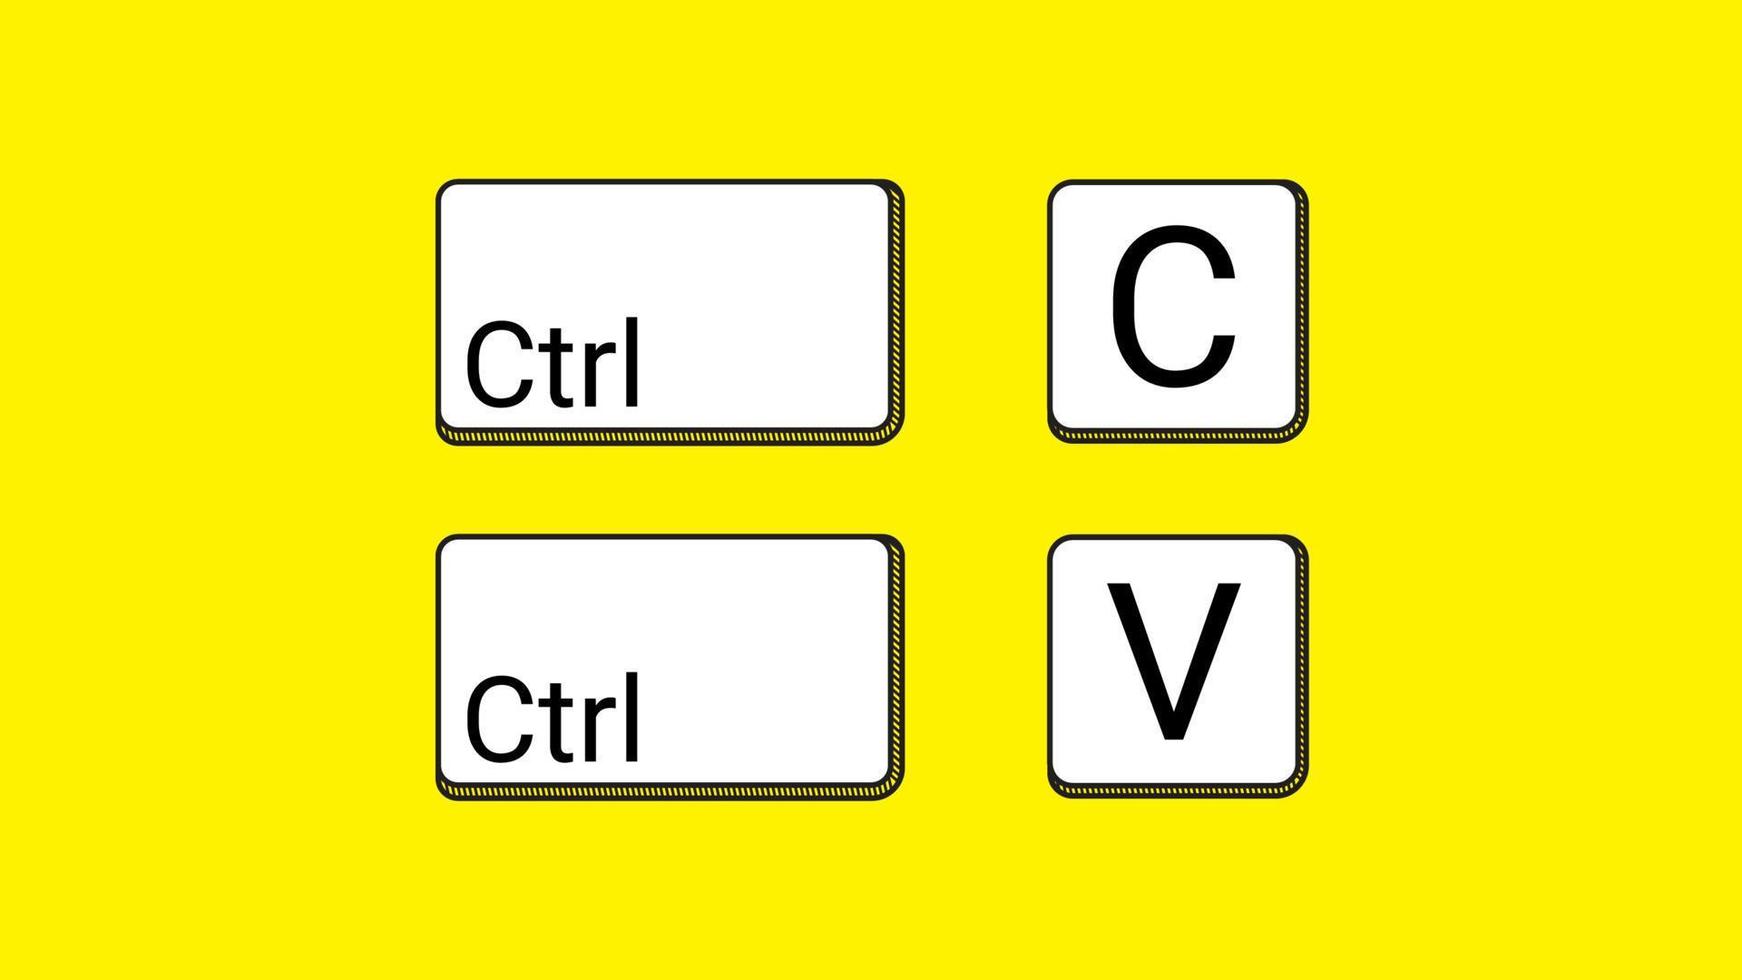 keyboard keys Ctrl C and Ctrl V, copy and paste the key shortcuts. Computer icon on yellow background vector